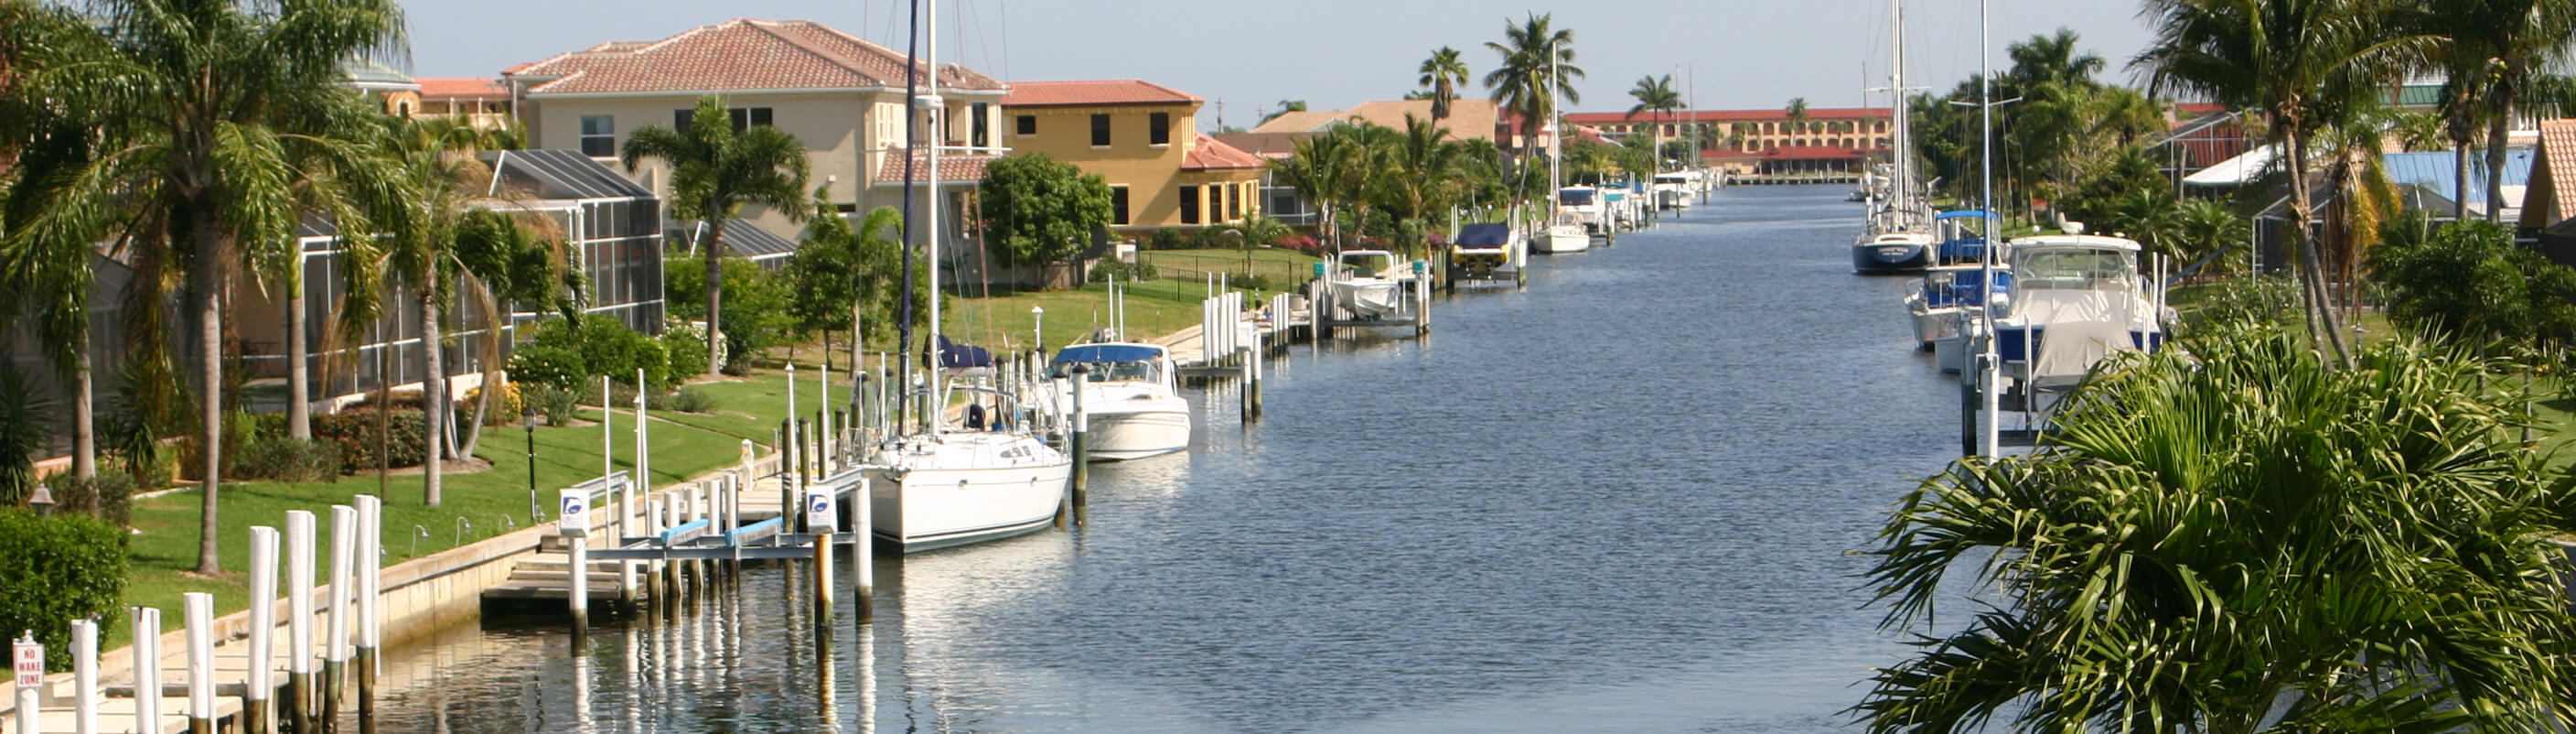 photo of a canal with with boats and large houses on each side